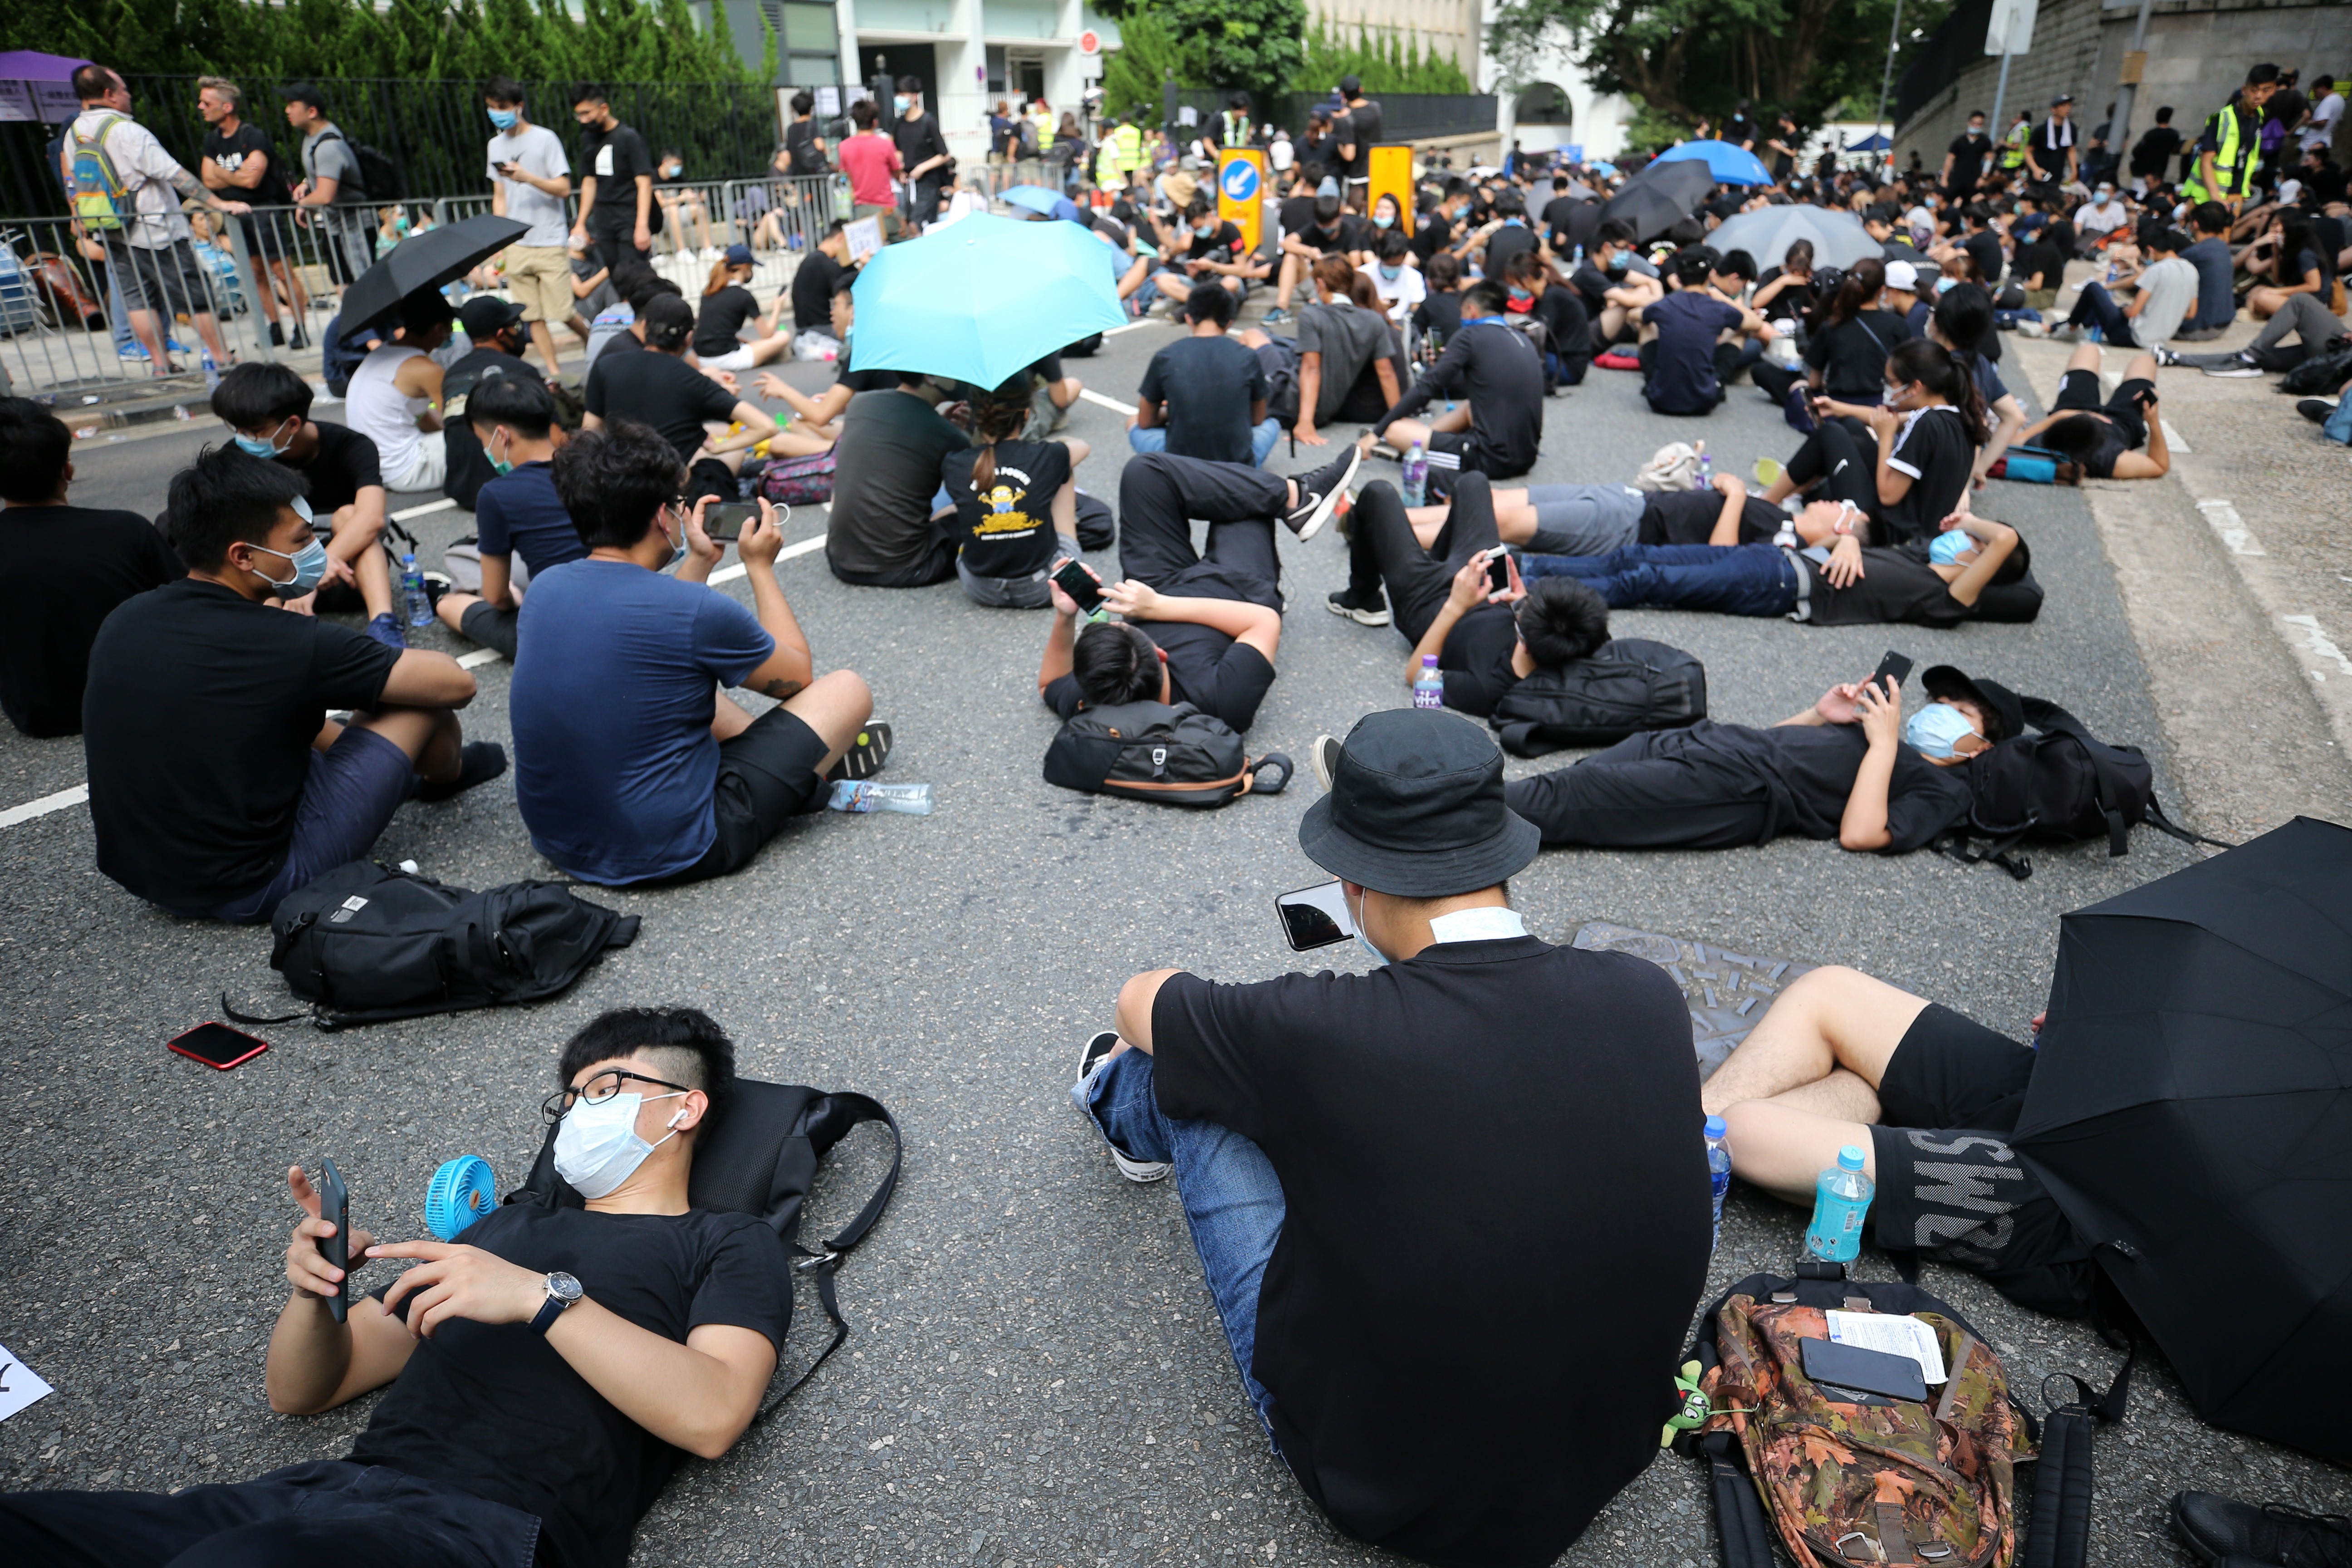 Extradition bill demonstrators take a break outside the Department of Justice in Hong Kong last month. The use of encrypted messaging, peer-to-peer communication technology, doxing and cyber attacks have shown that the protest is also very much in the digital realm. Photo: Sam Tsang